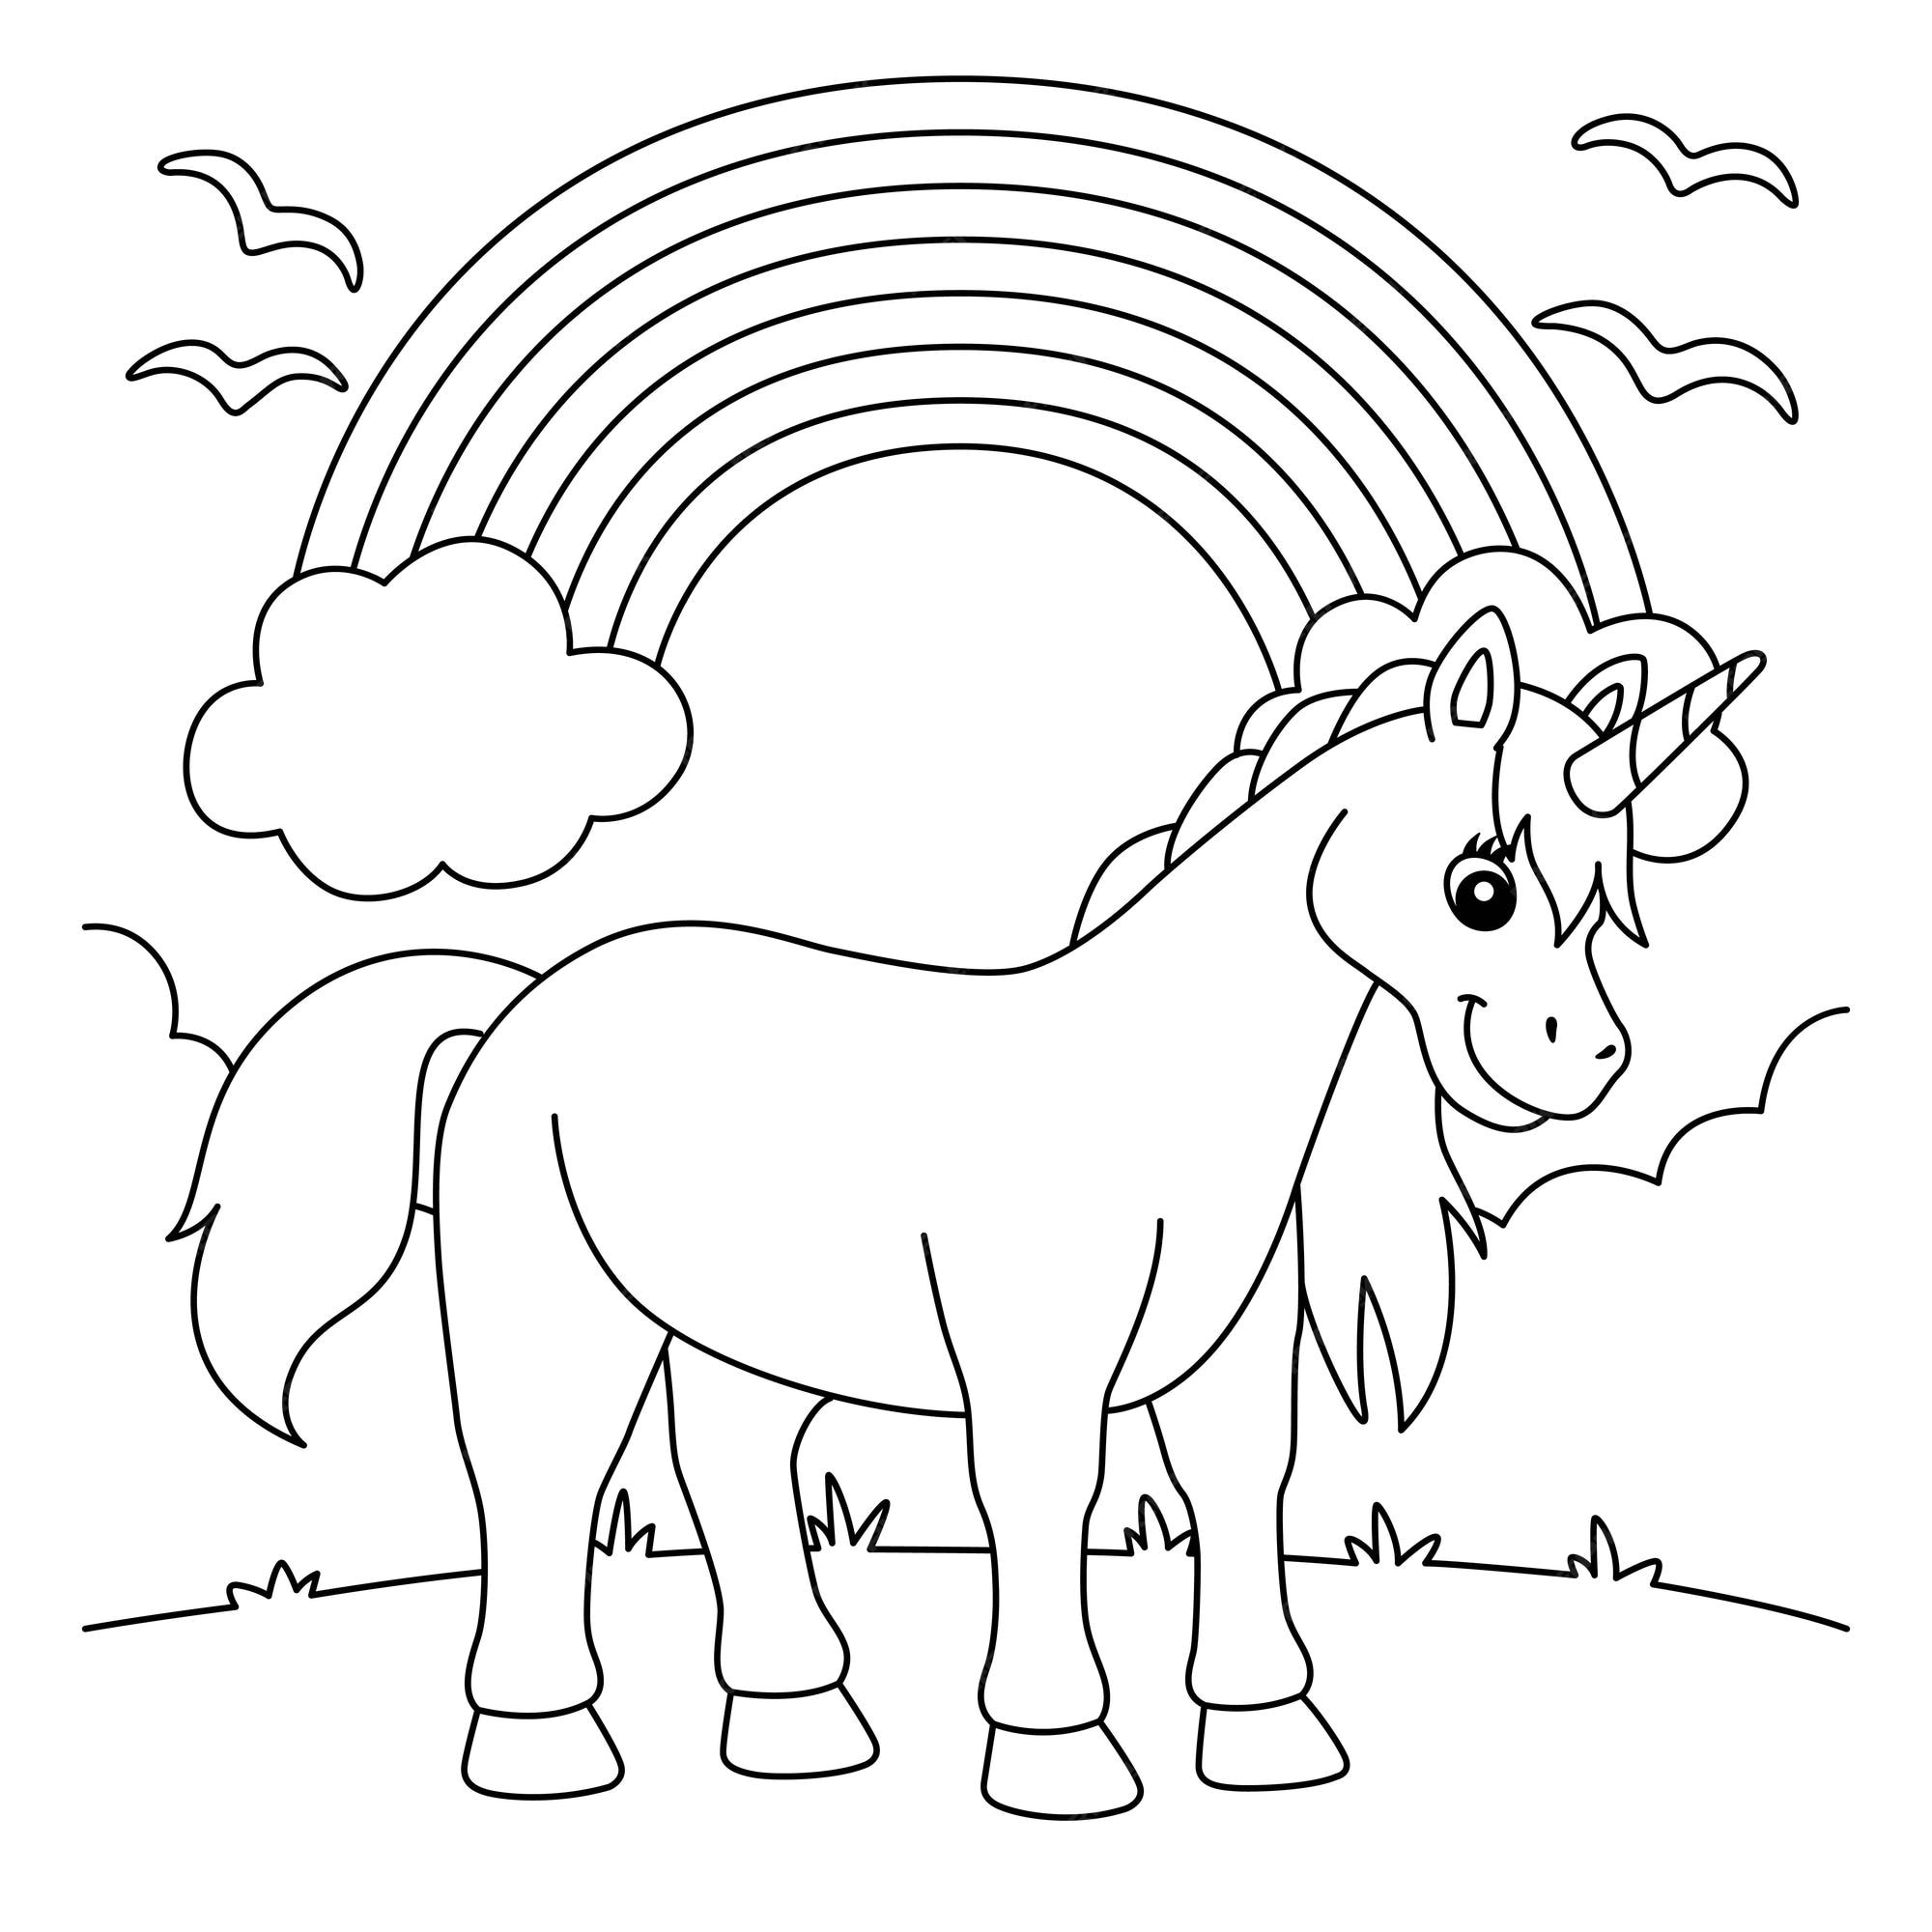 Premium vector unicorn standing under the rainbow coloring page